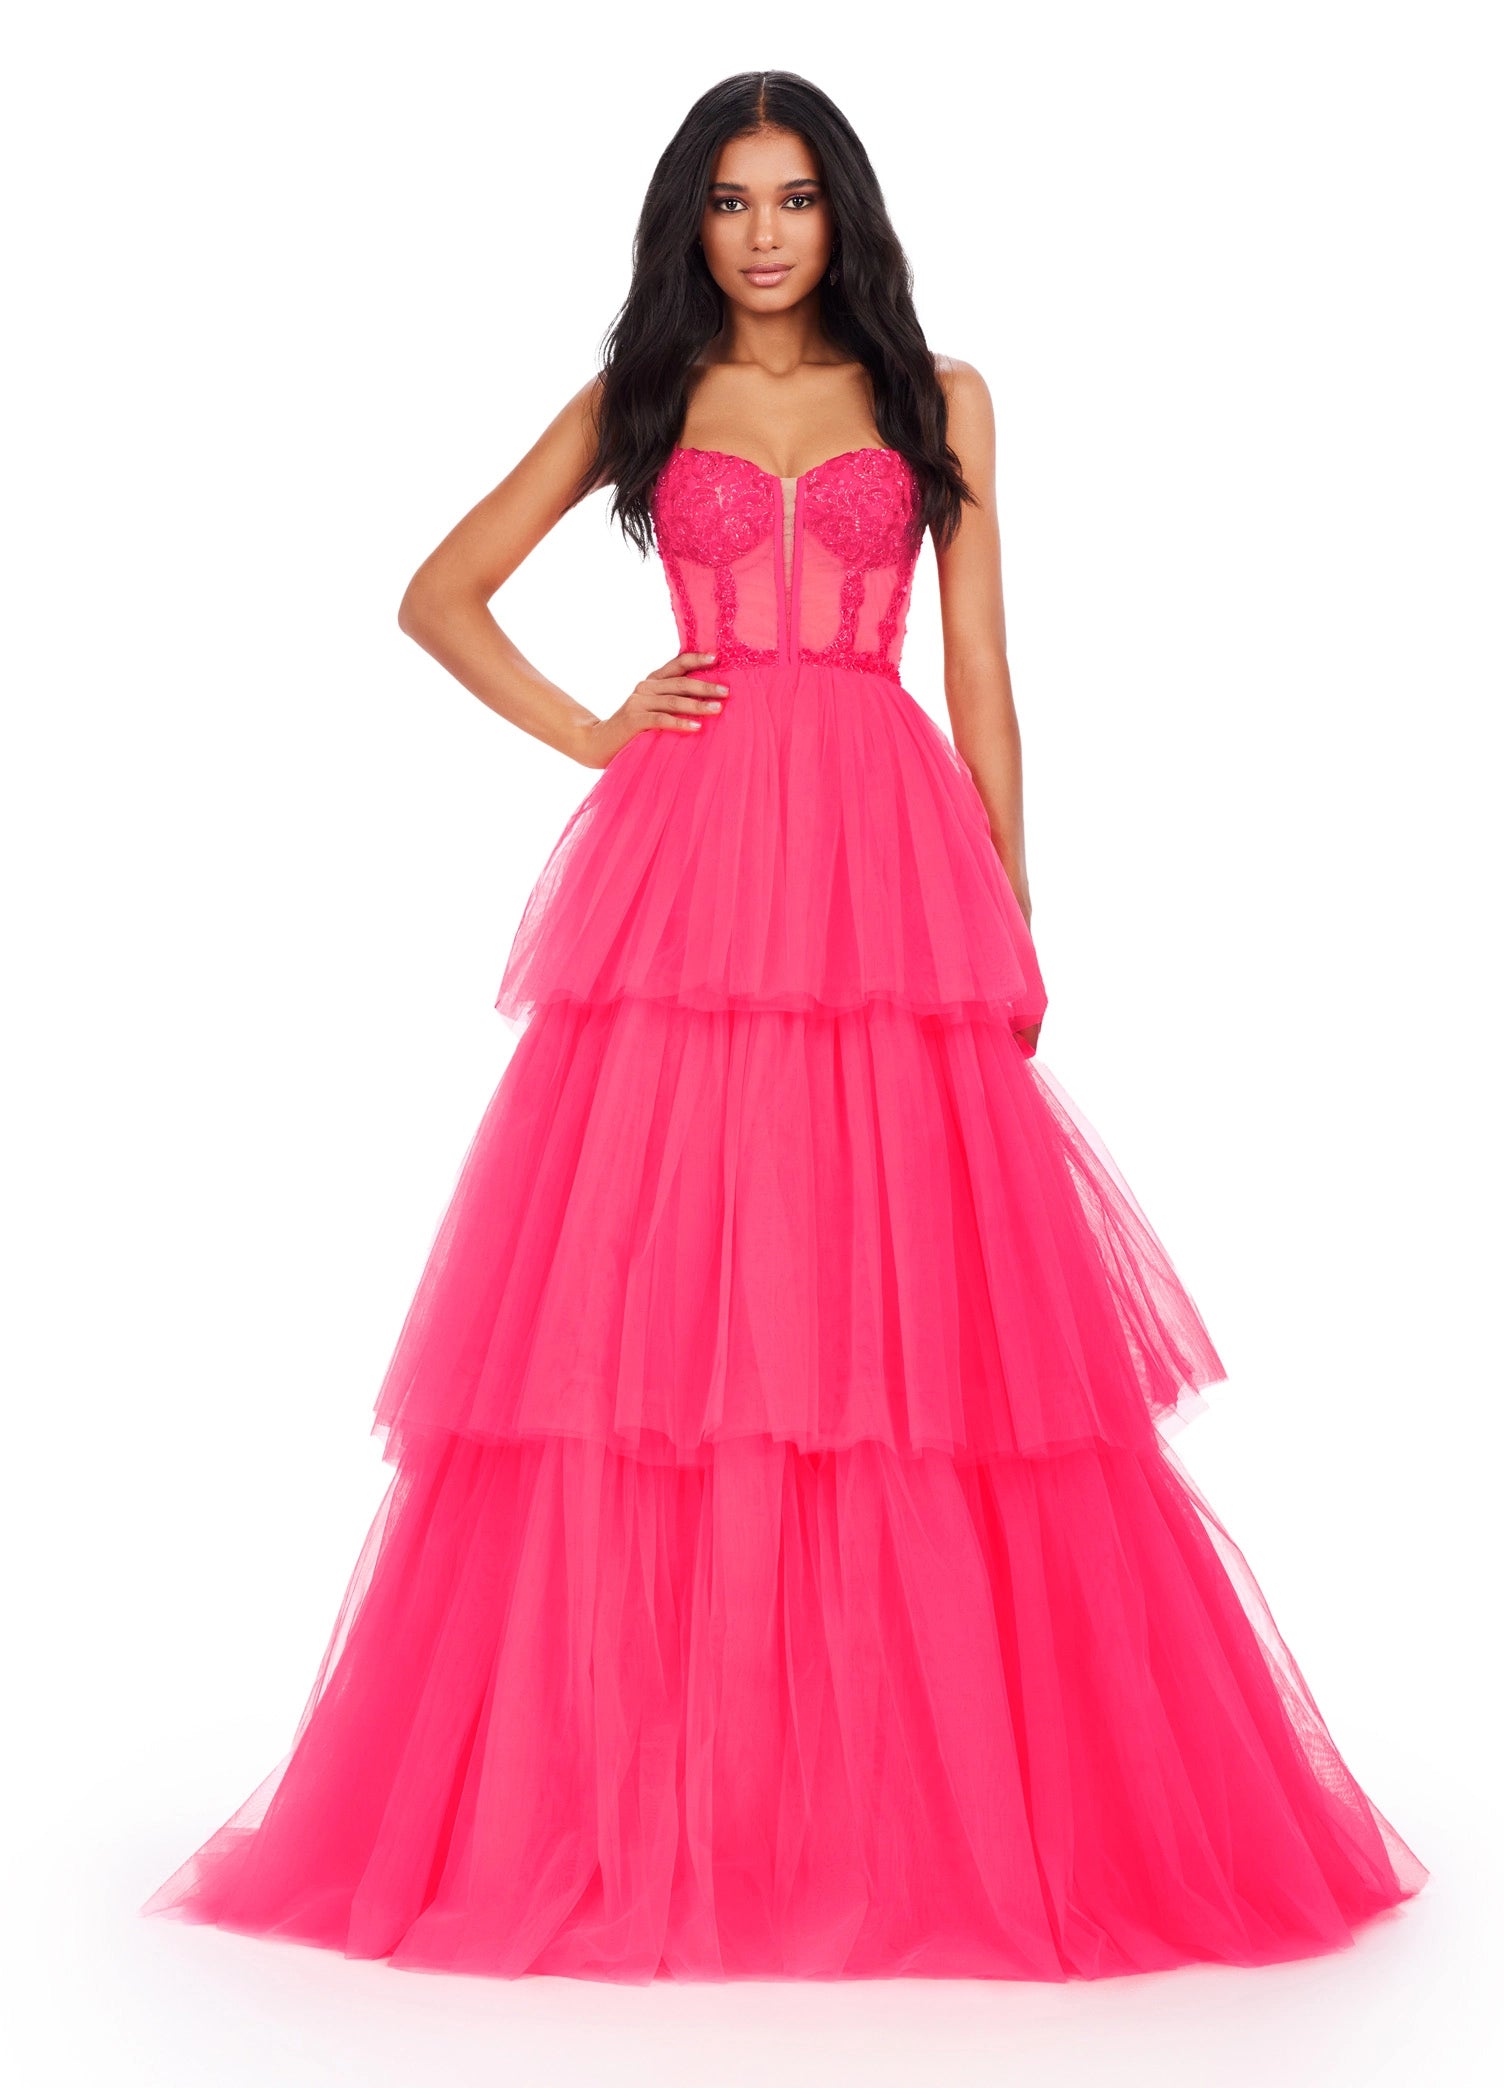 Pearl Pink Tulle Ball Gown Long Sleeves Prom Dress MP643